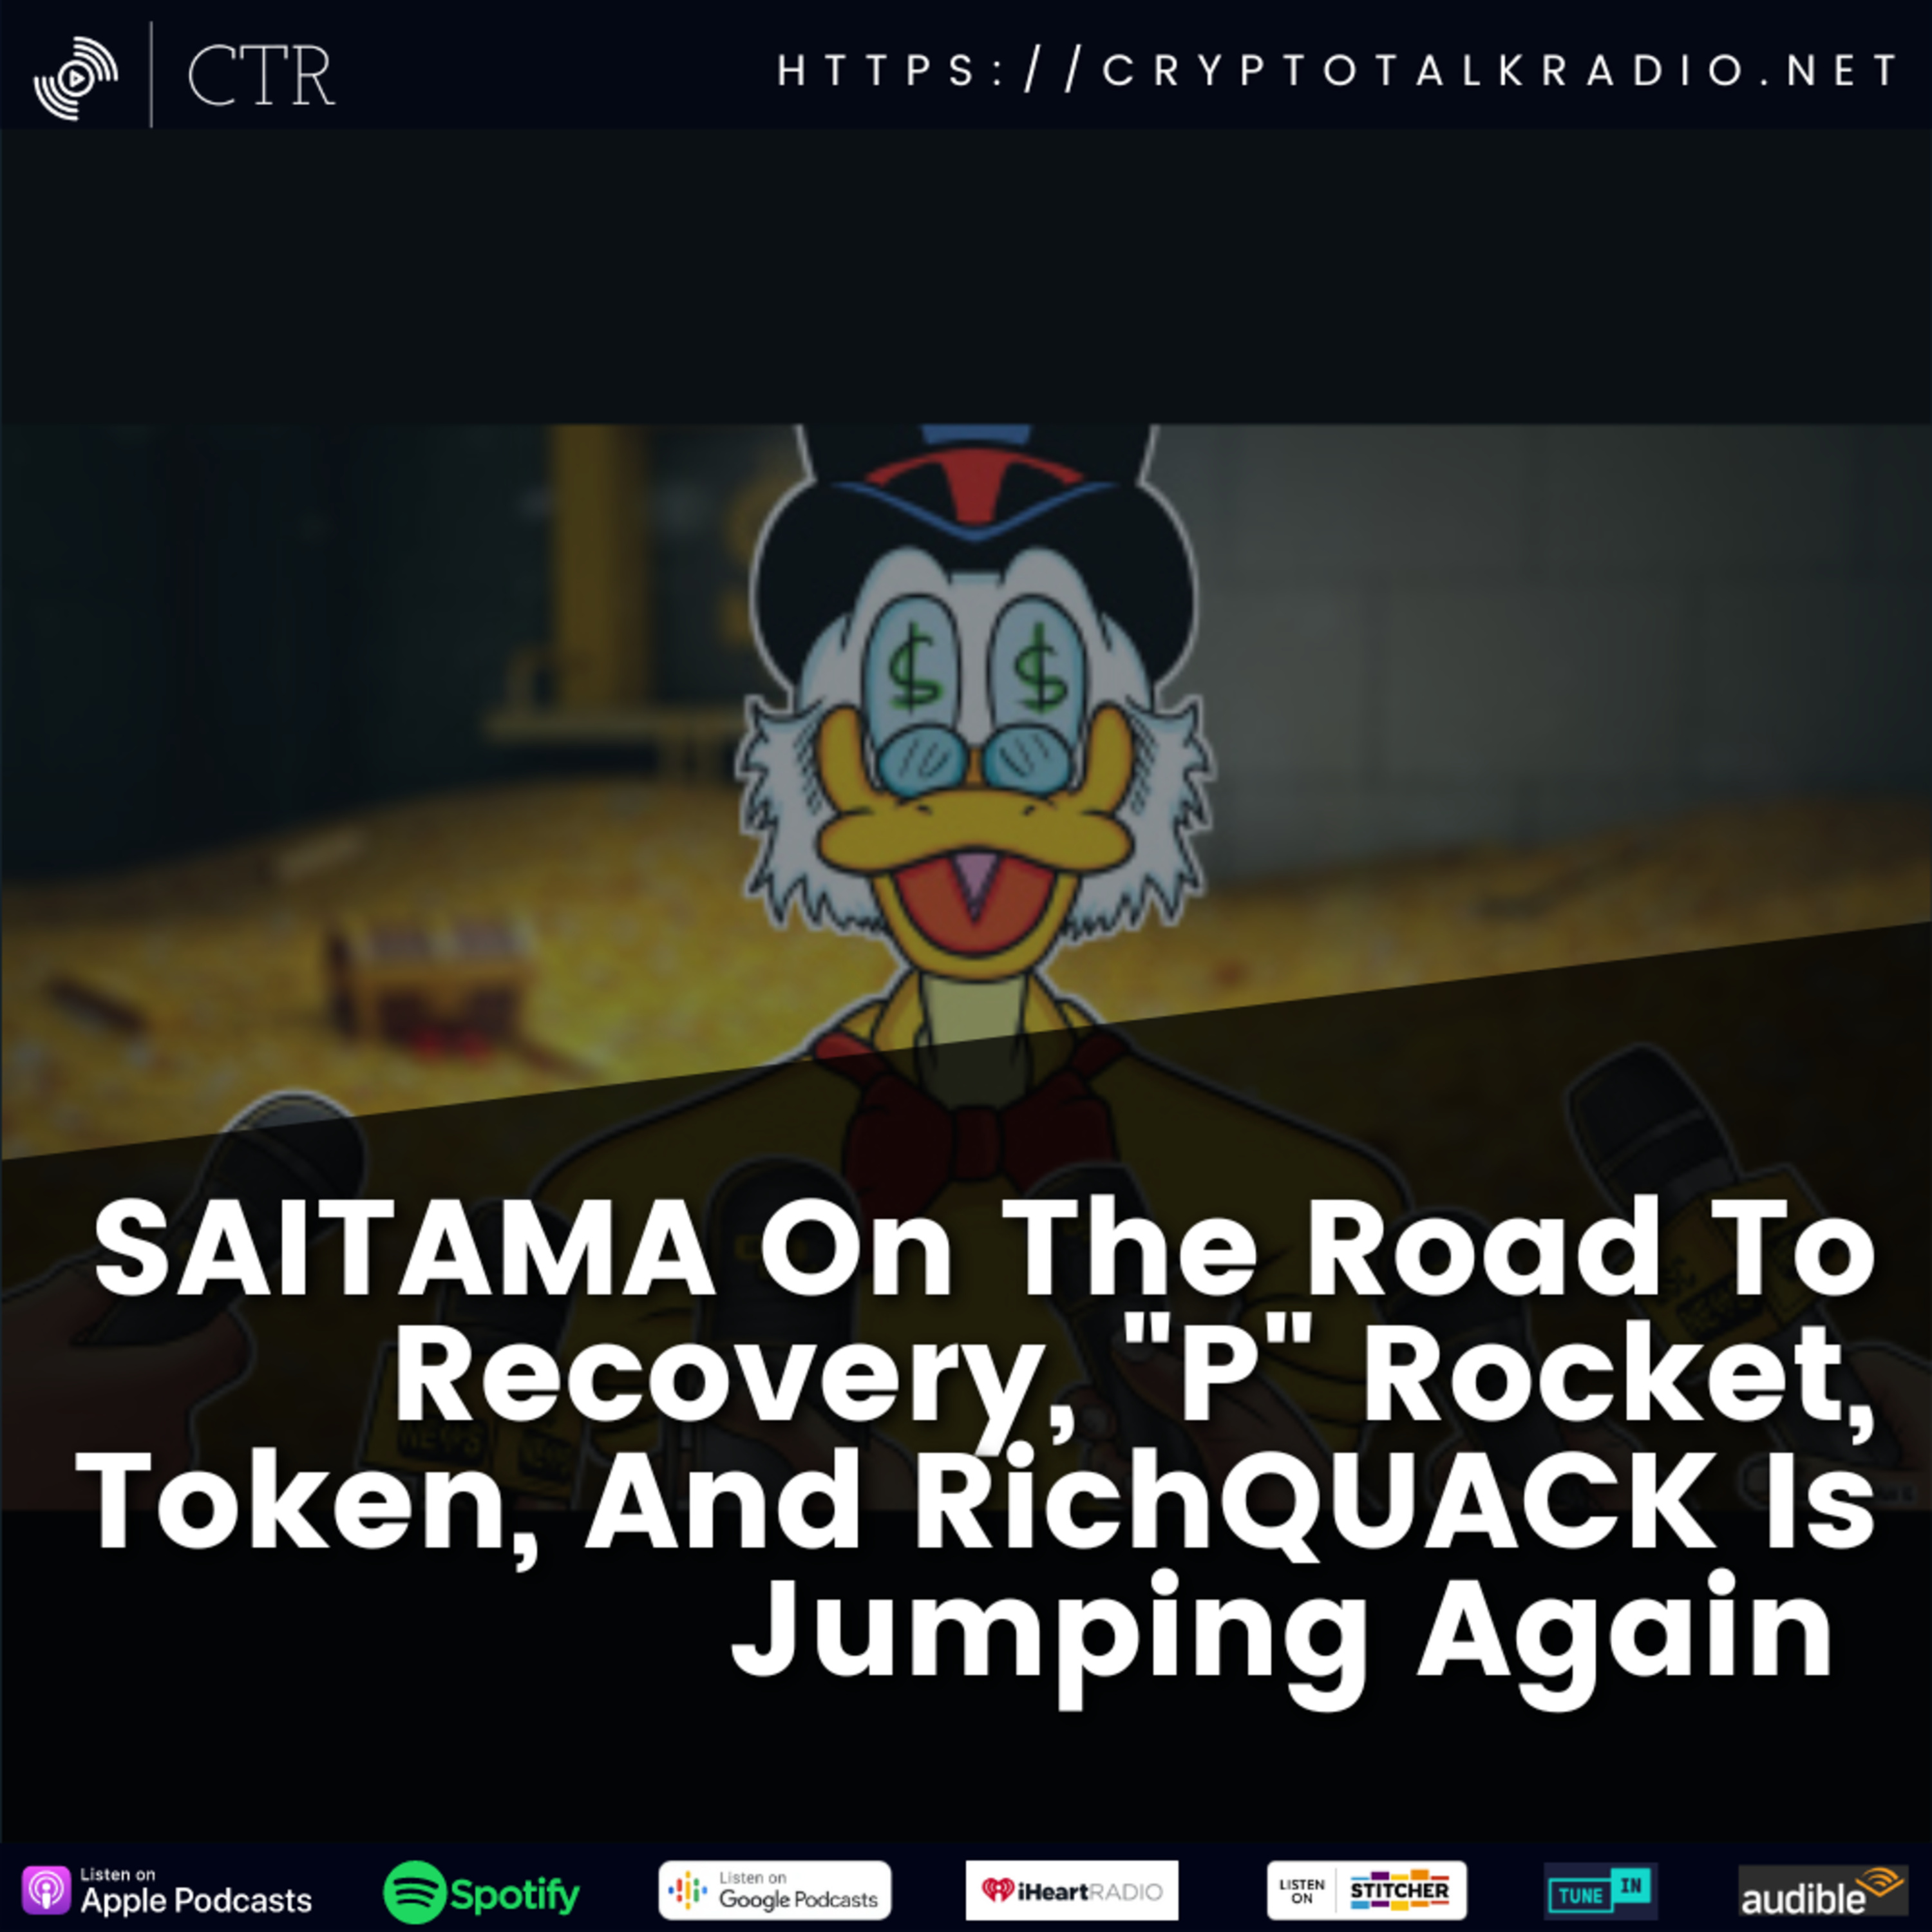 SAITAMA On The Road To Recovery, "P" Rocket (Just...Listen To The Episode) Token, And RichQUACK Is Jumping Again